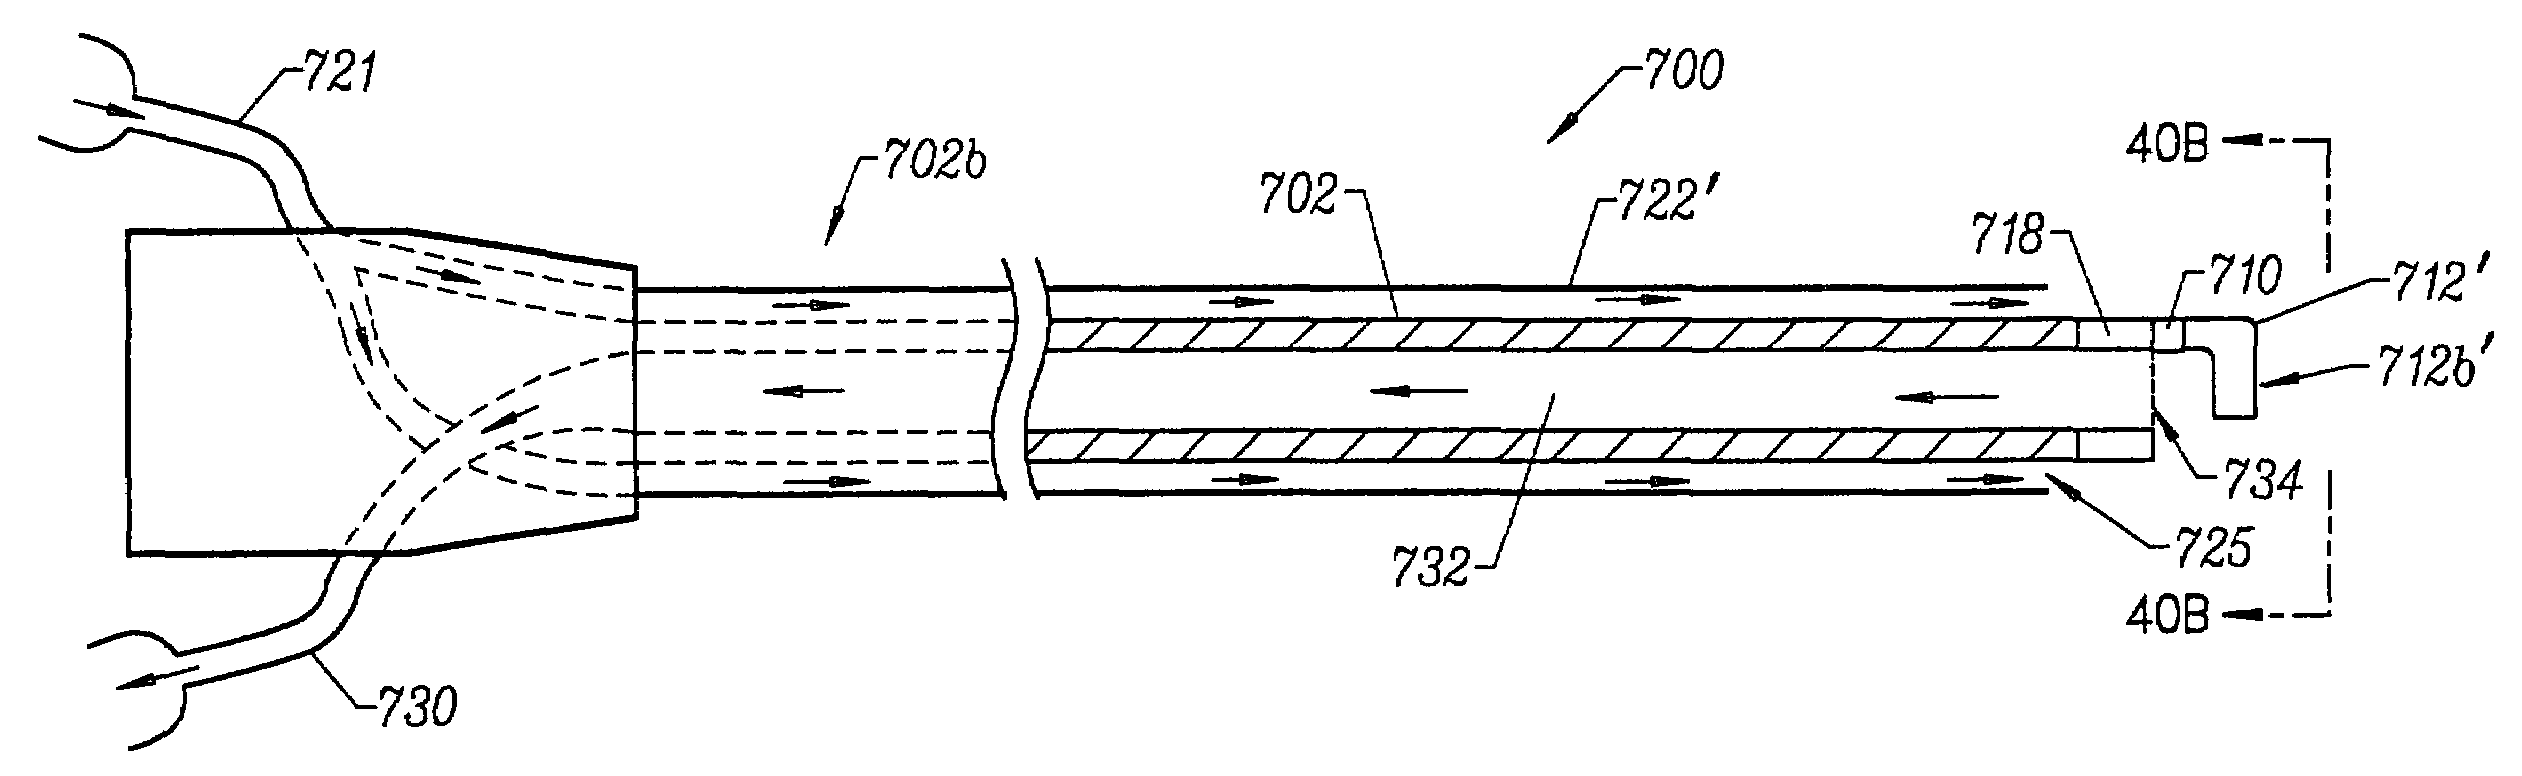 Electrosurgical systems and methods for removing and modifying tissue